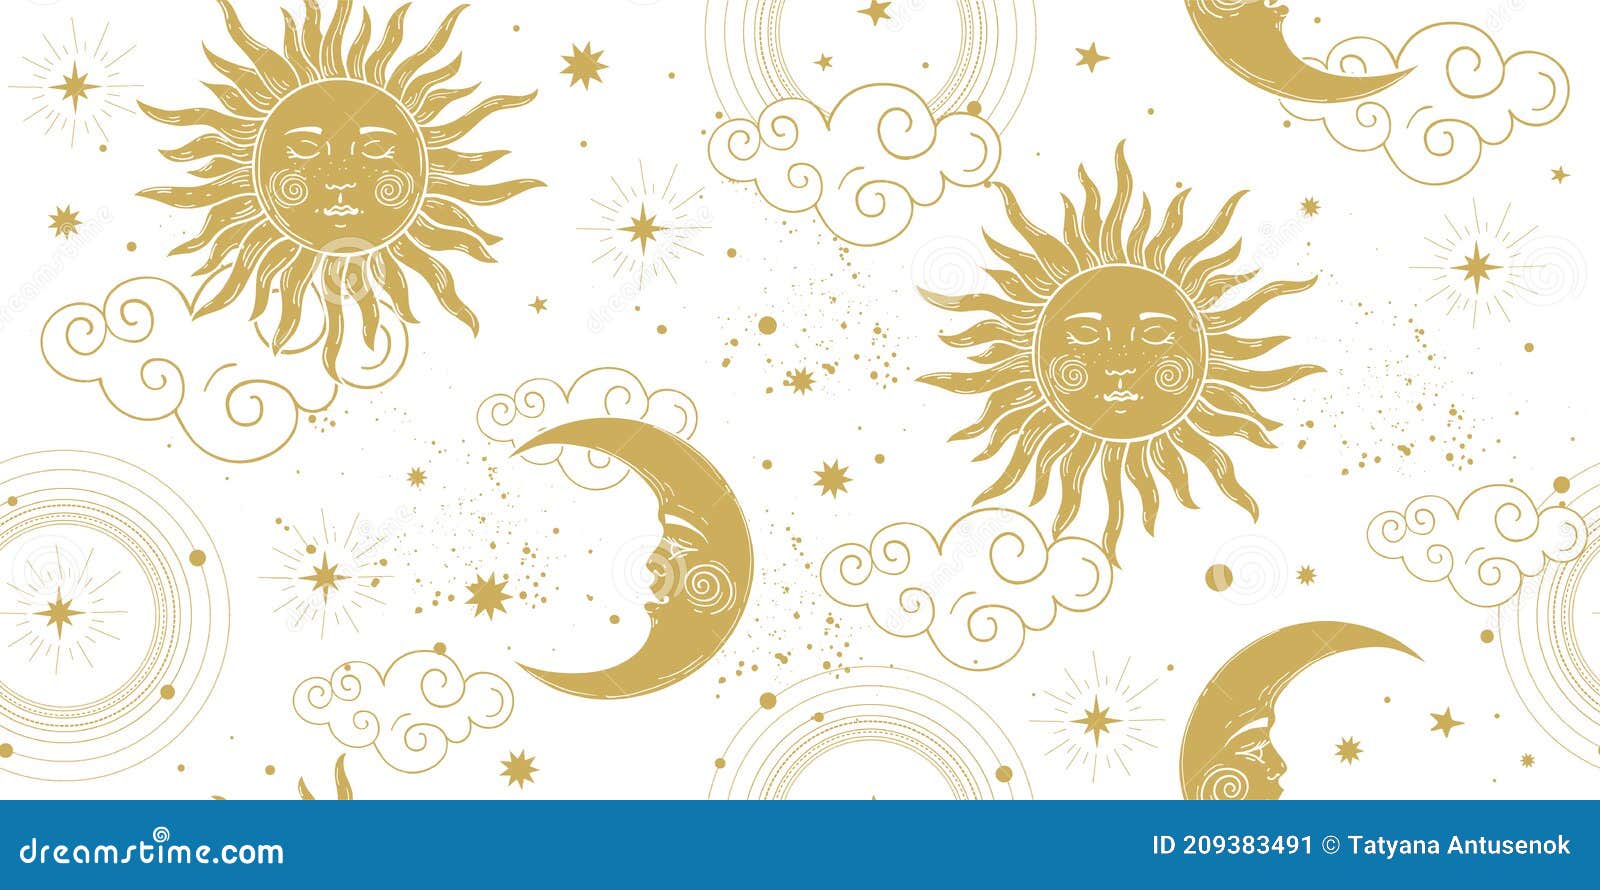 seamless celestial pattern with golden sun and crescent moon on white background, vintage boho ornament for astrology and tarot.